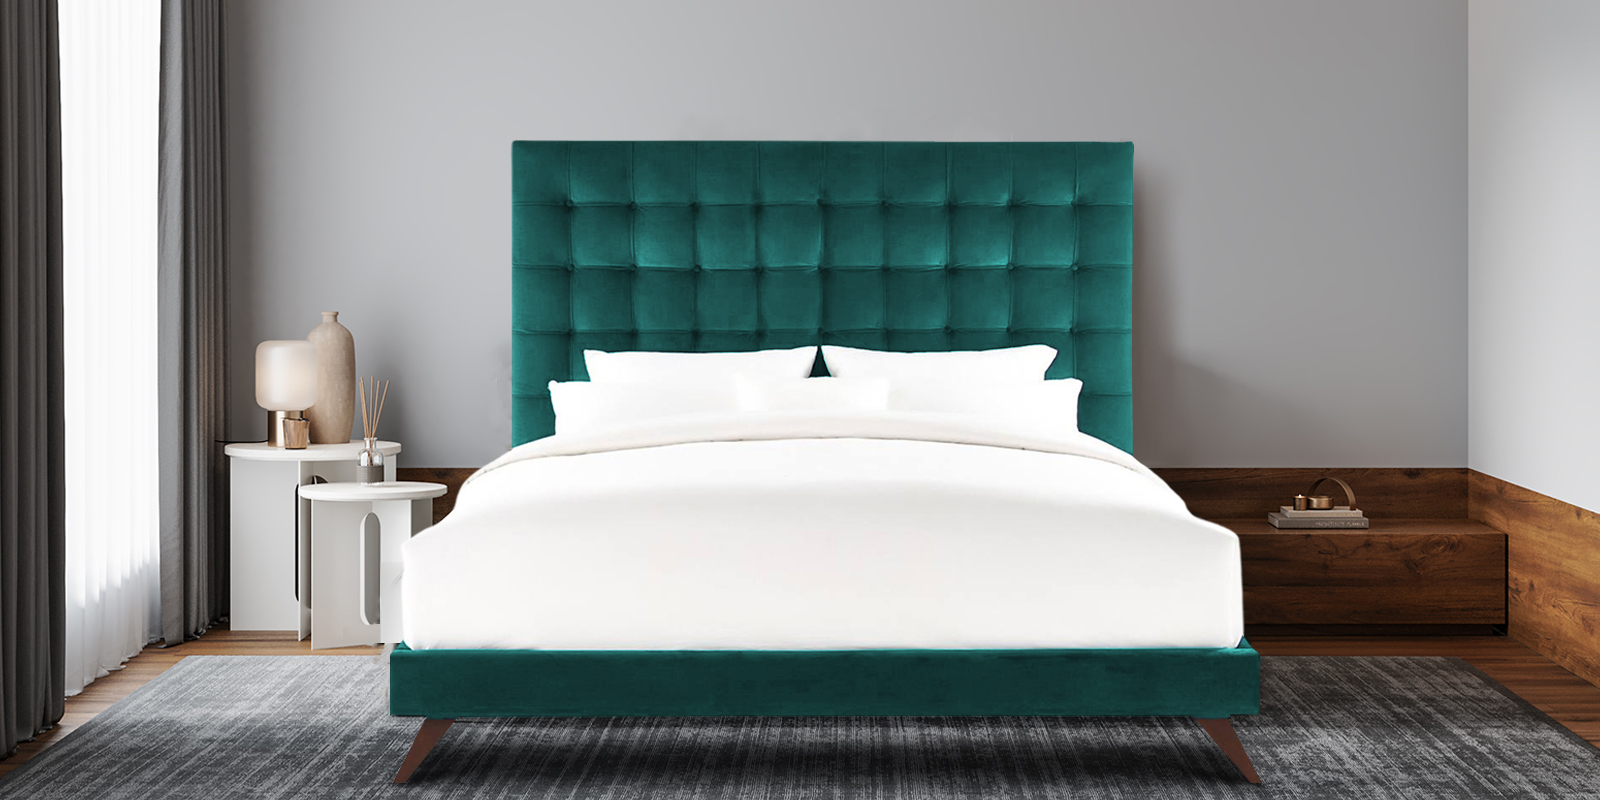 Glorious Fabric Upholstered King Size Bed in Green Colour ...